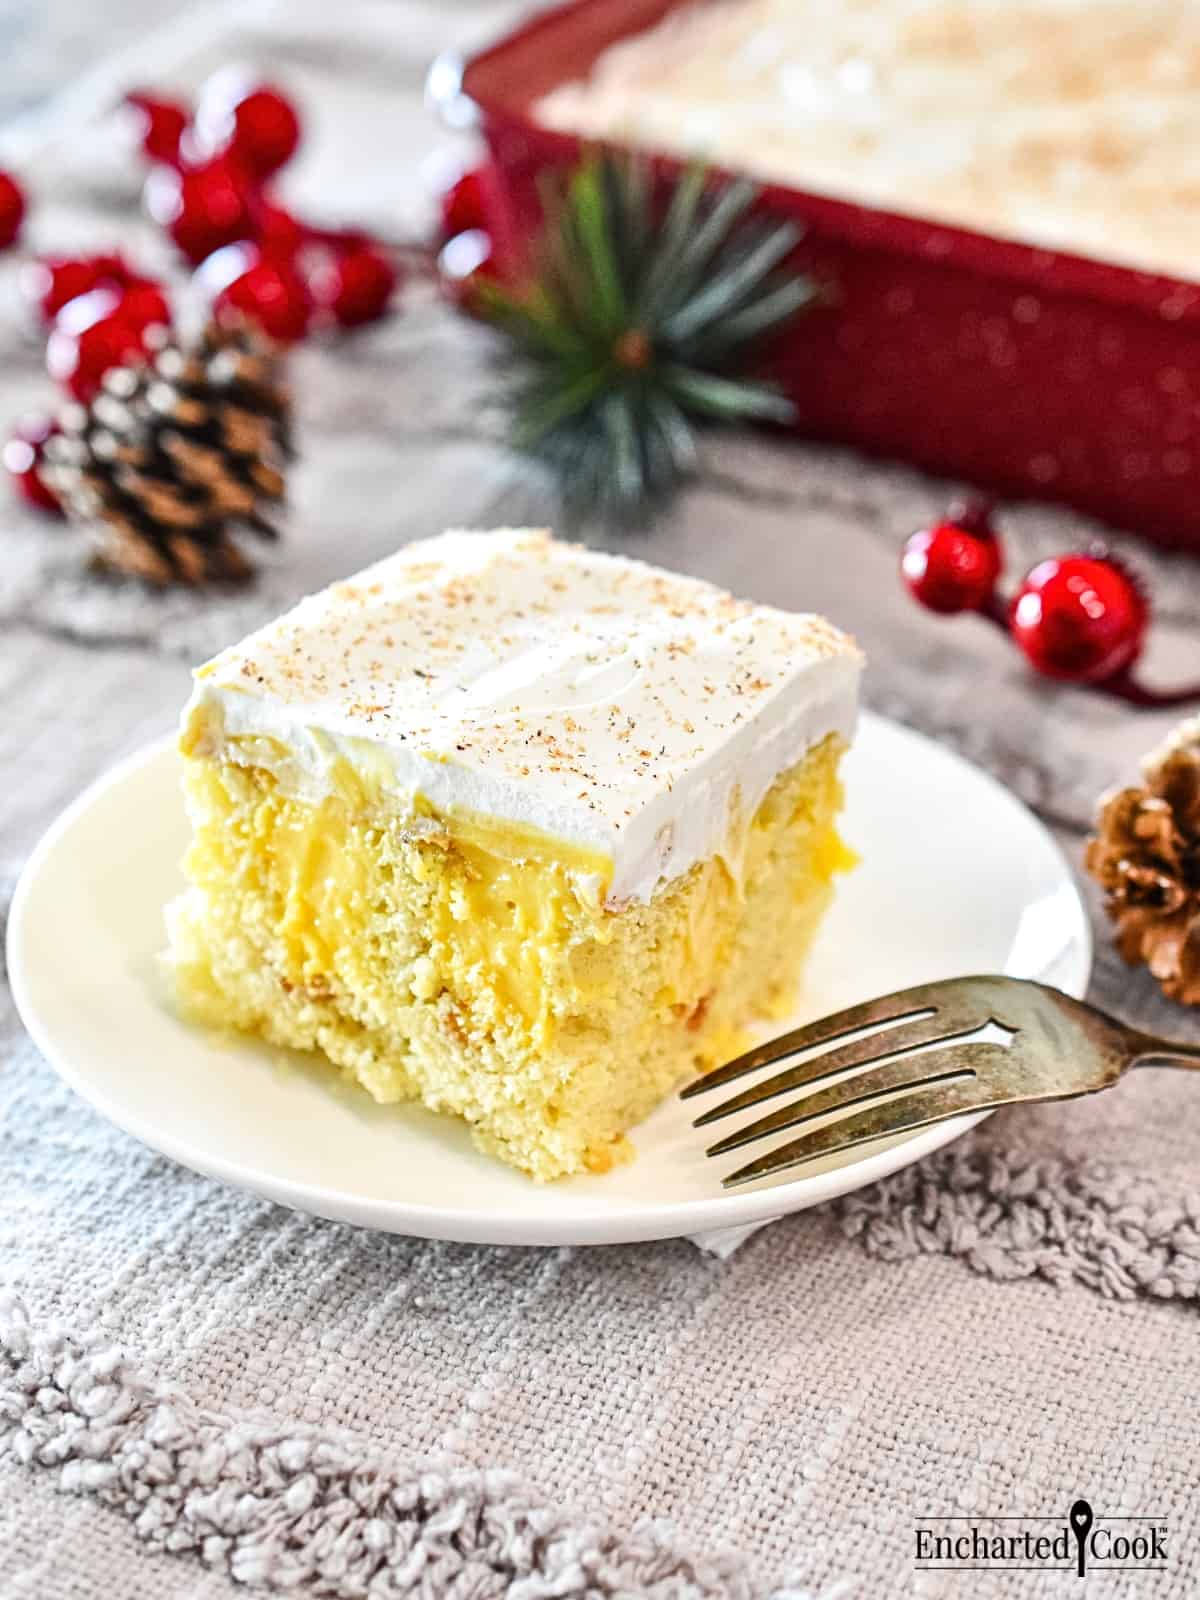 A slice of yellow eggnog cake on a white plate with a fork.